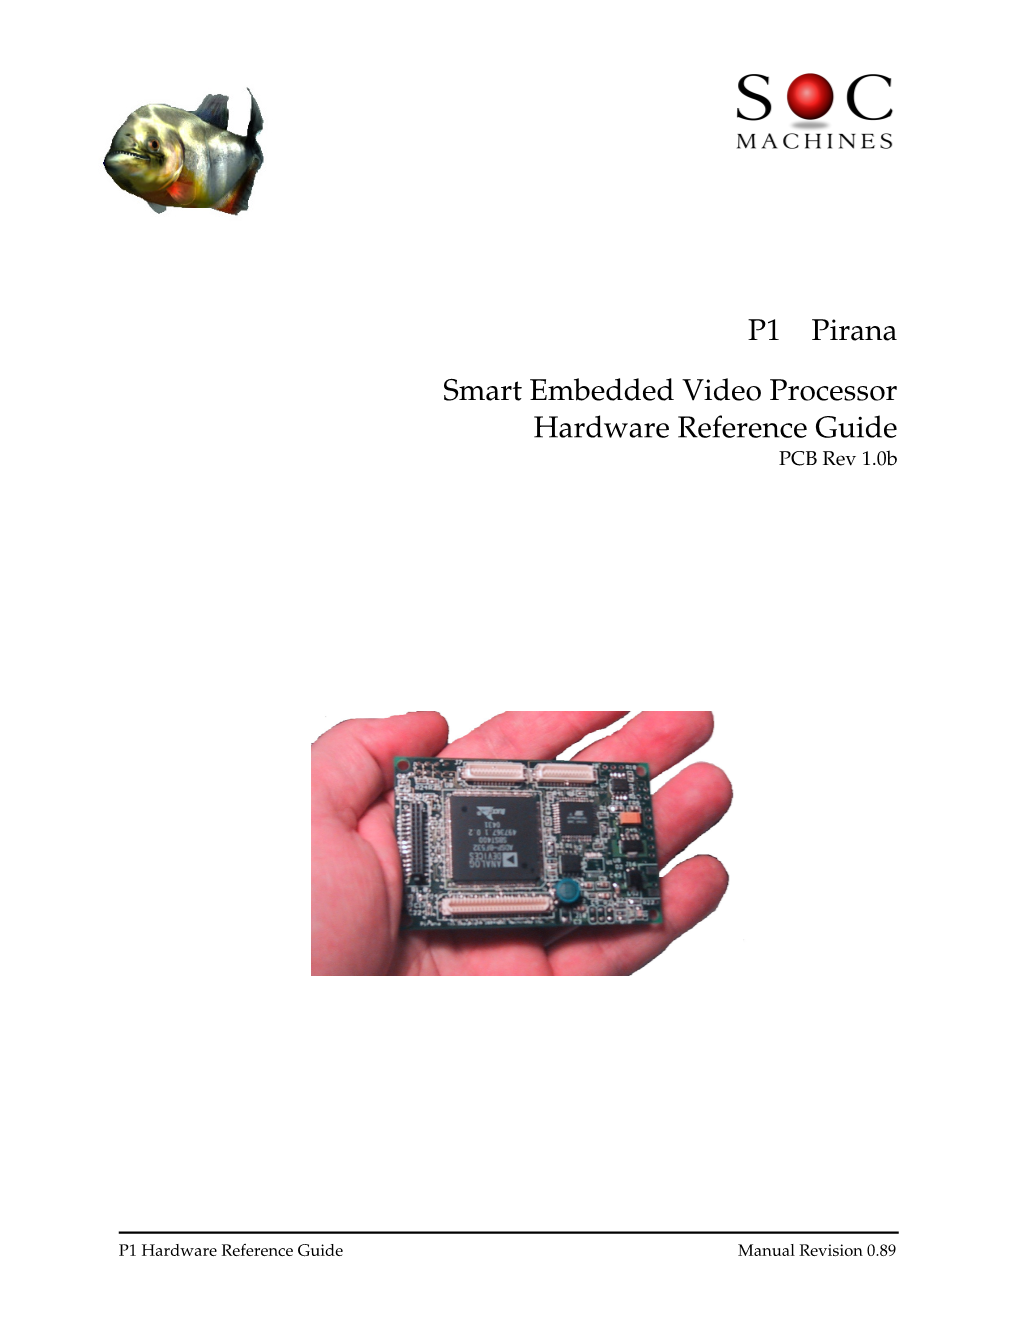 P1 Pirana Smart Embedded Video Processor Hardware Reference Guide